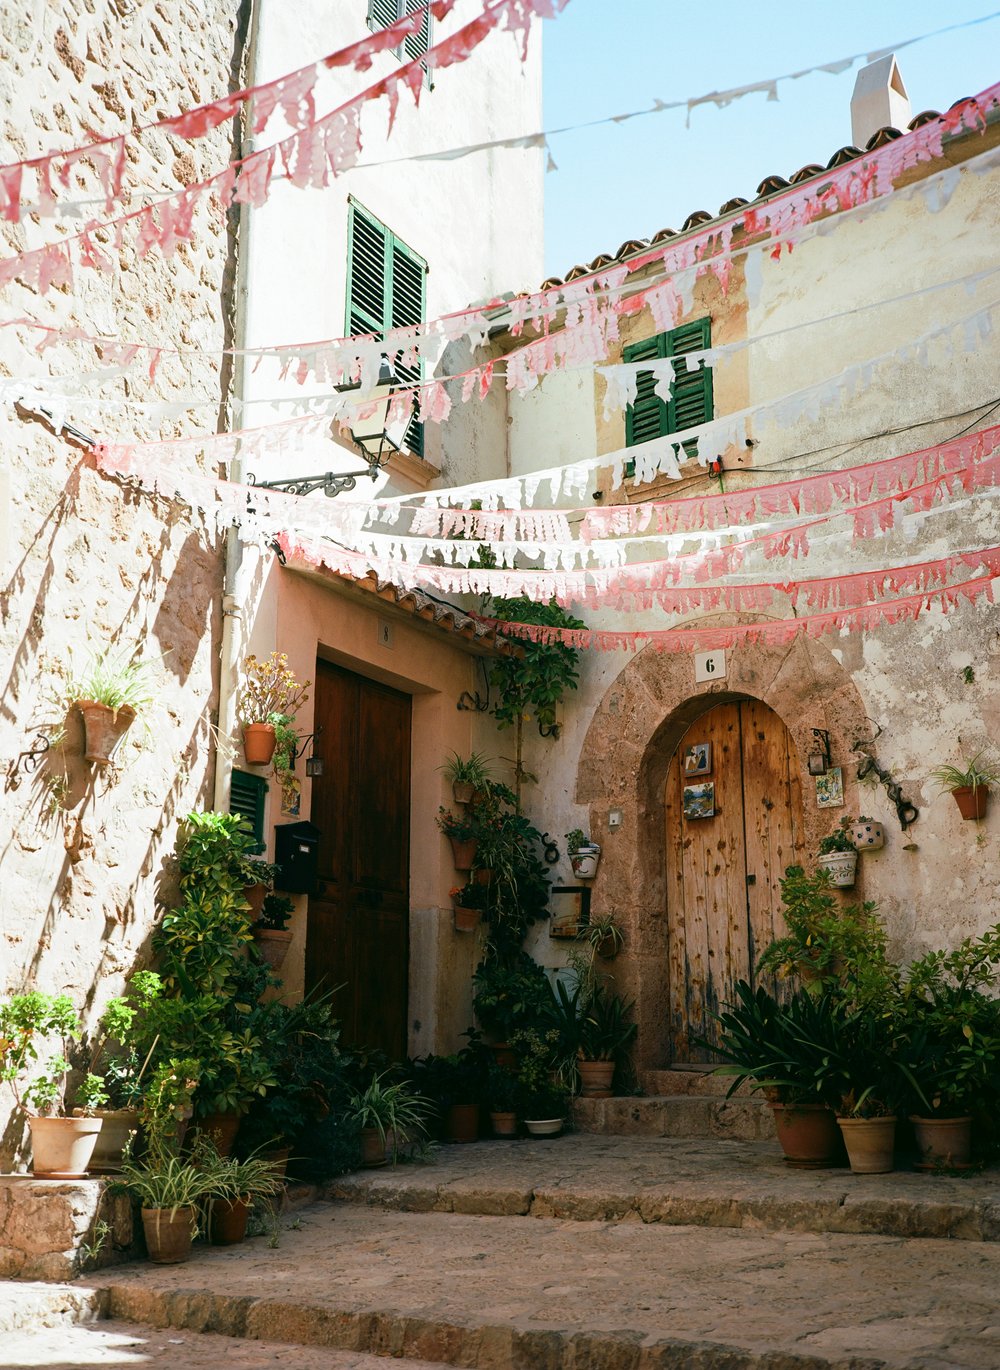  colorful decorations of a patio in a small town in Mallorca, Spain 